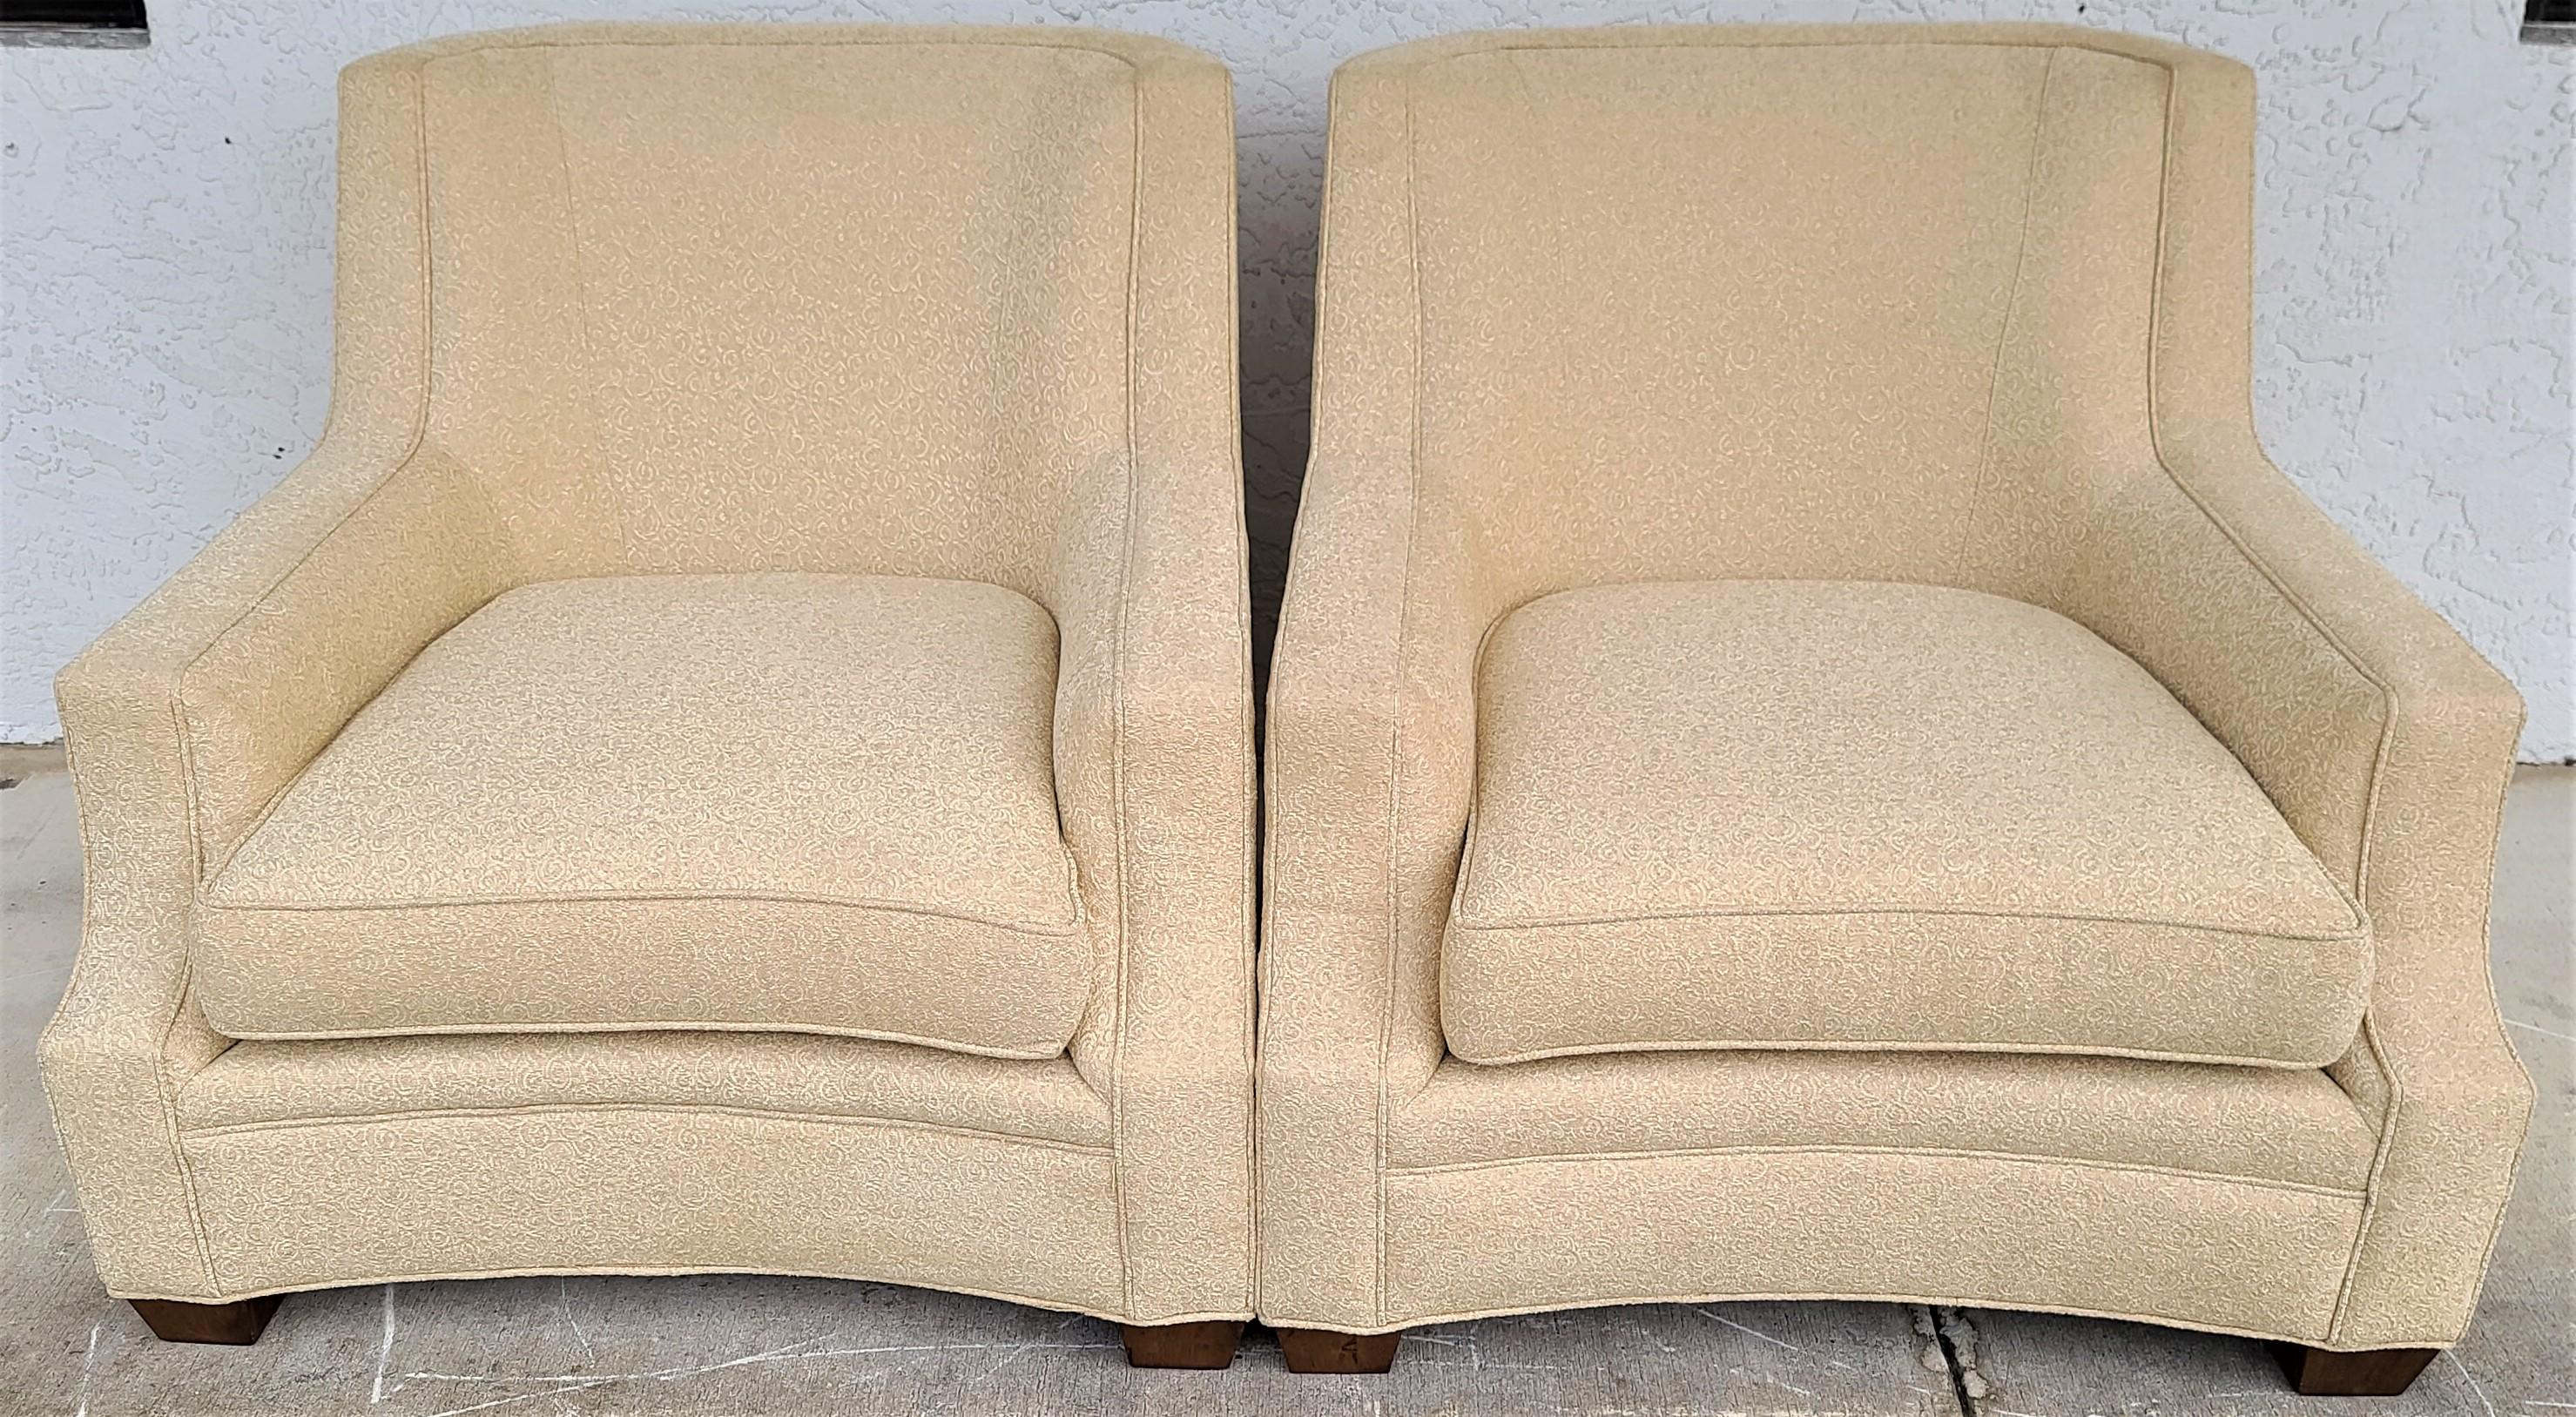 Oversized Beige Lounge Chairs by Century Furniture Co - A Pair In Good Condition For Sale In Lake Worth, FL